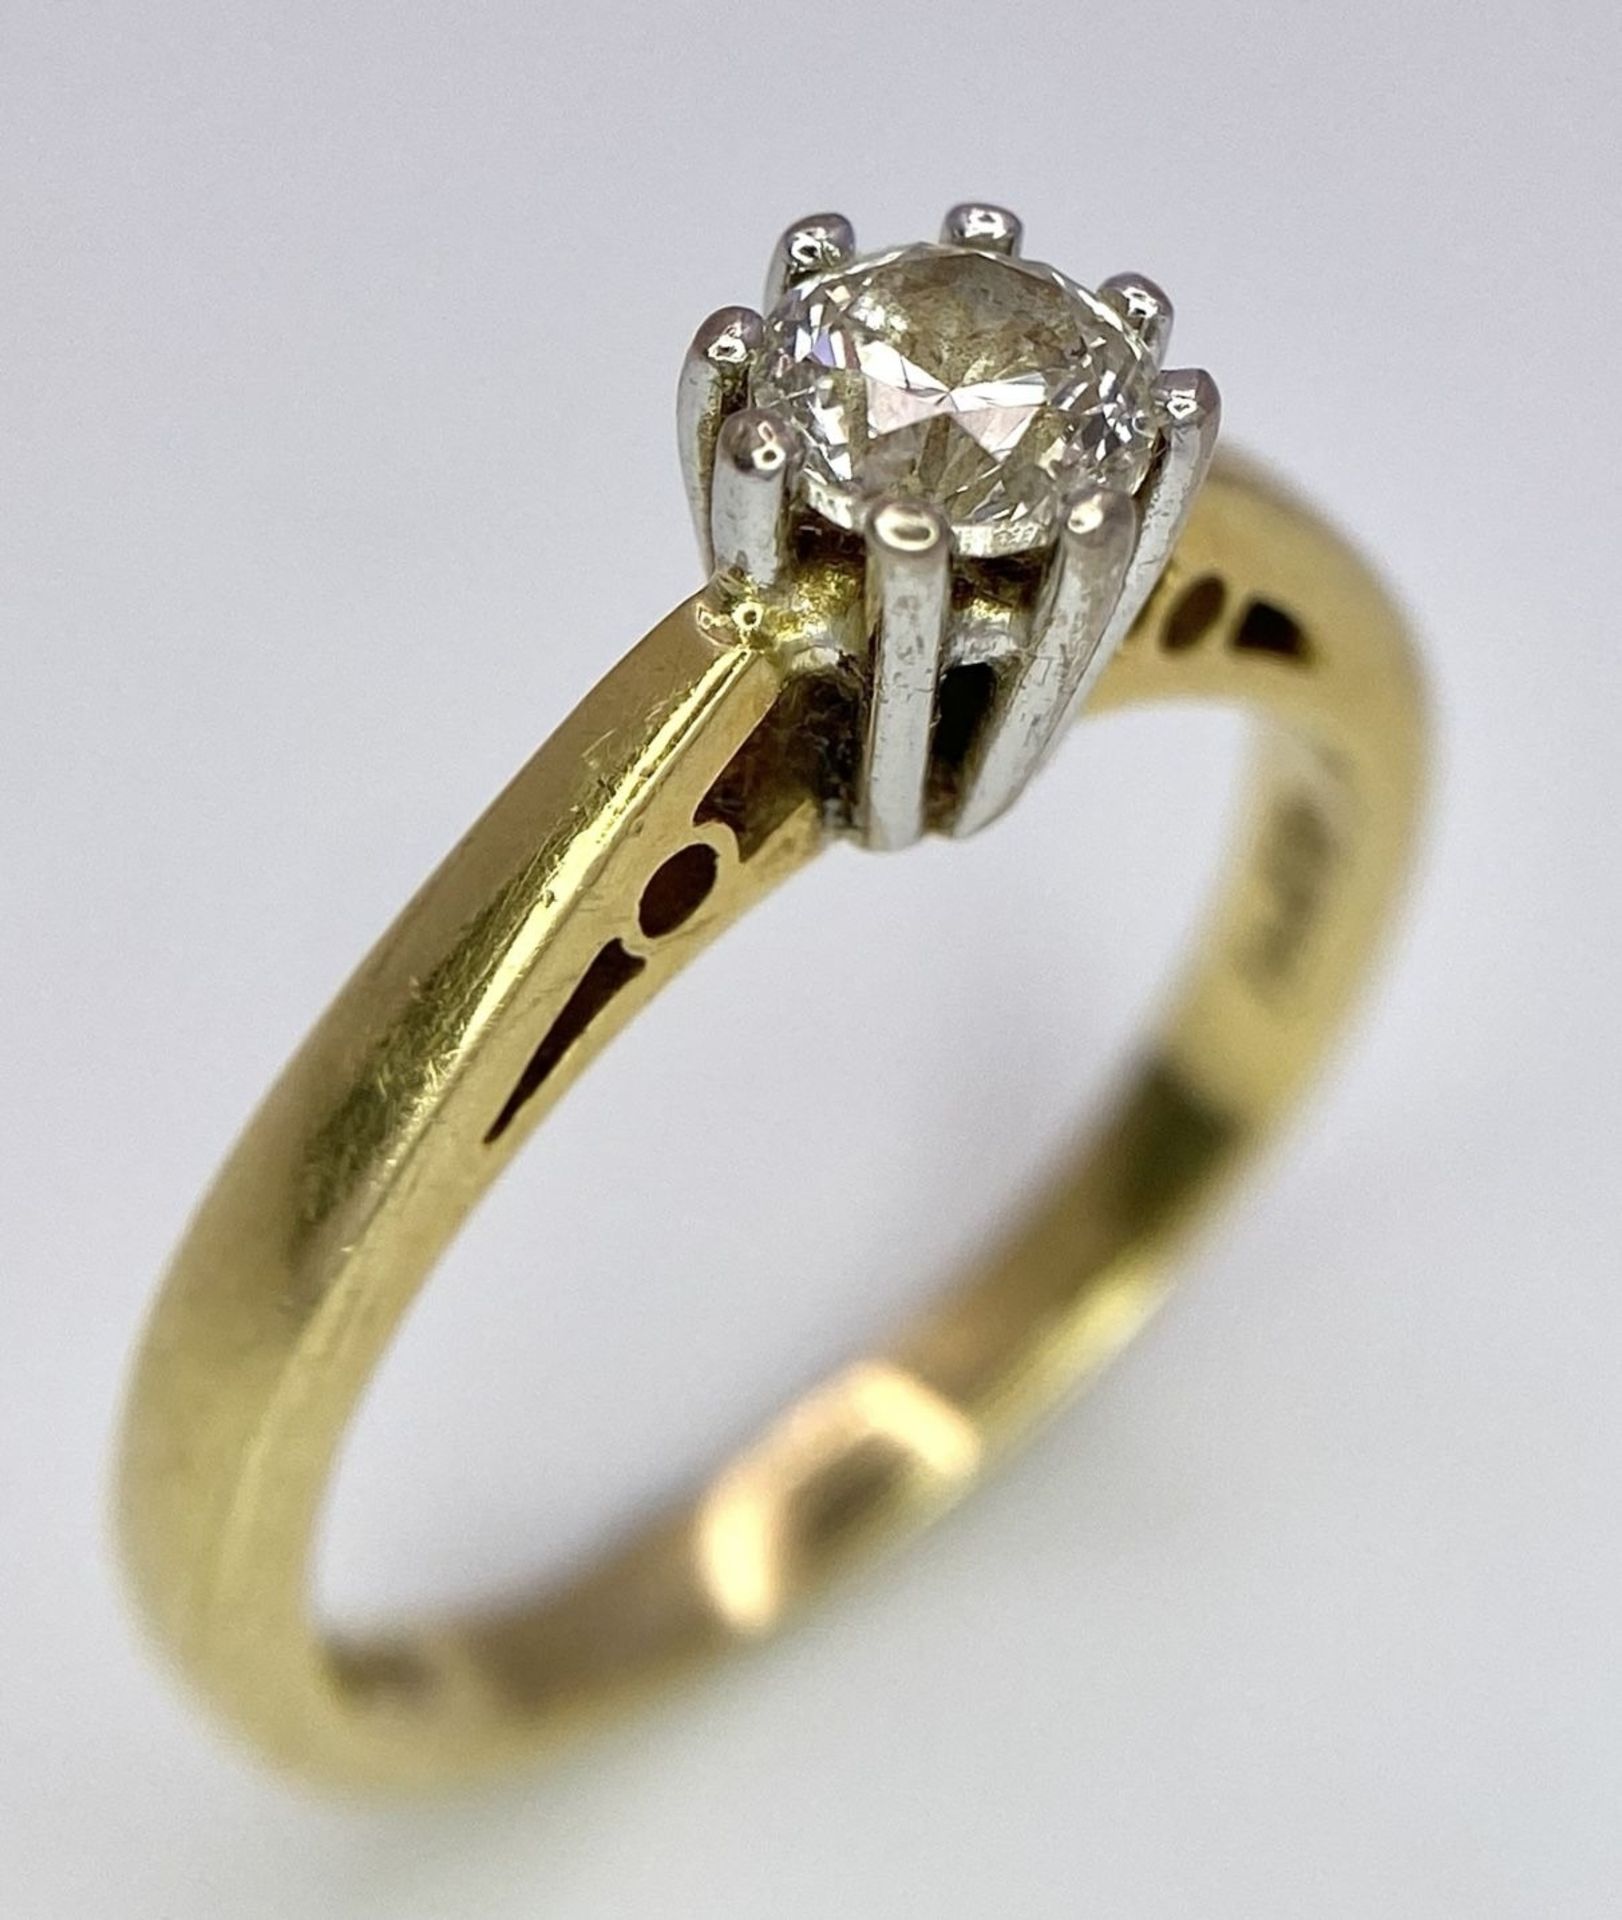 A Vintage 18K Yellow Gold Diamond Solitaire Ring. 0.40ct brilliant round cut diamond. Size L. 3.4g - Image 2 of 7